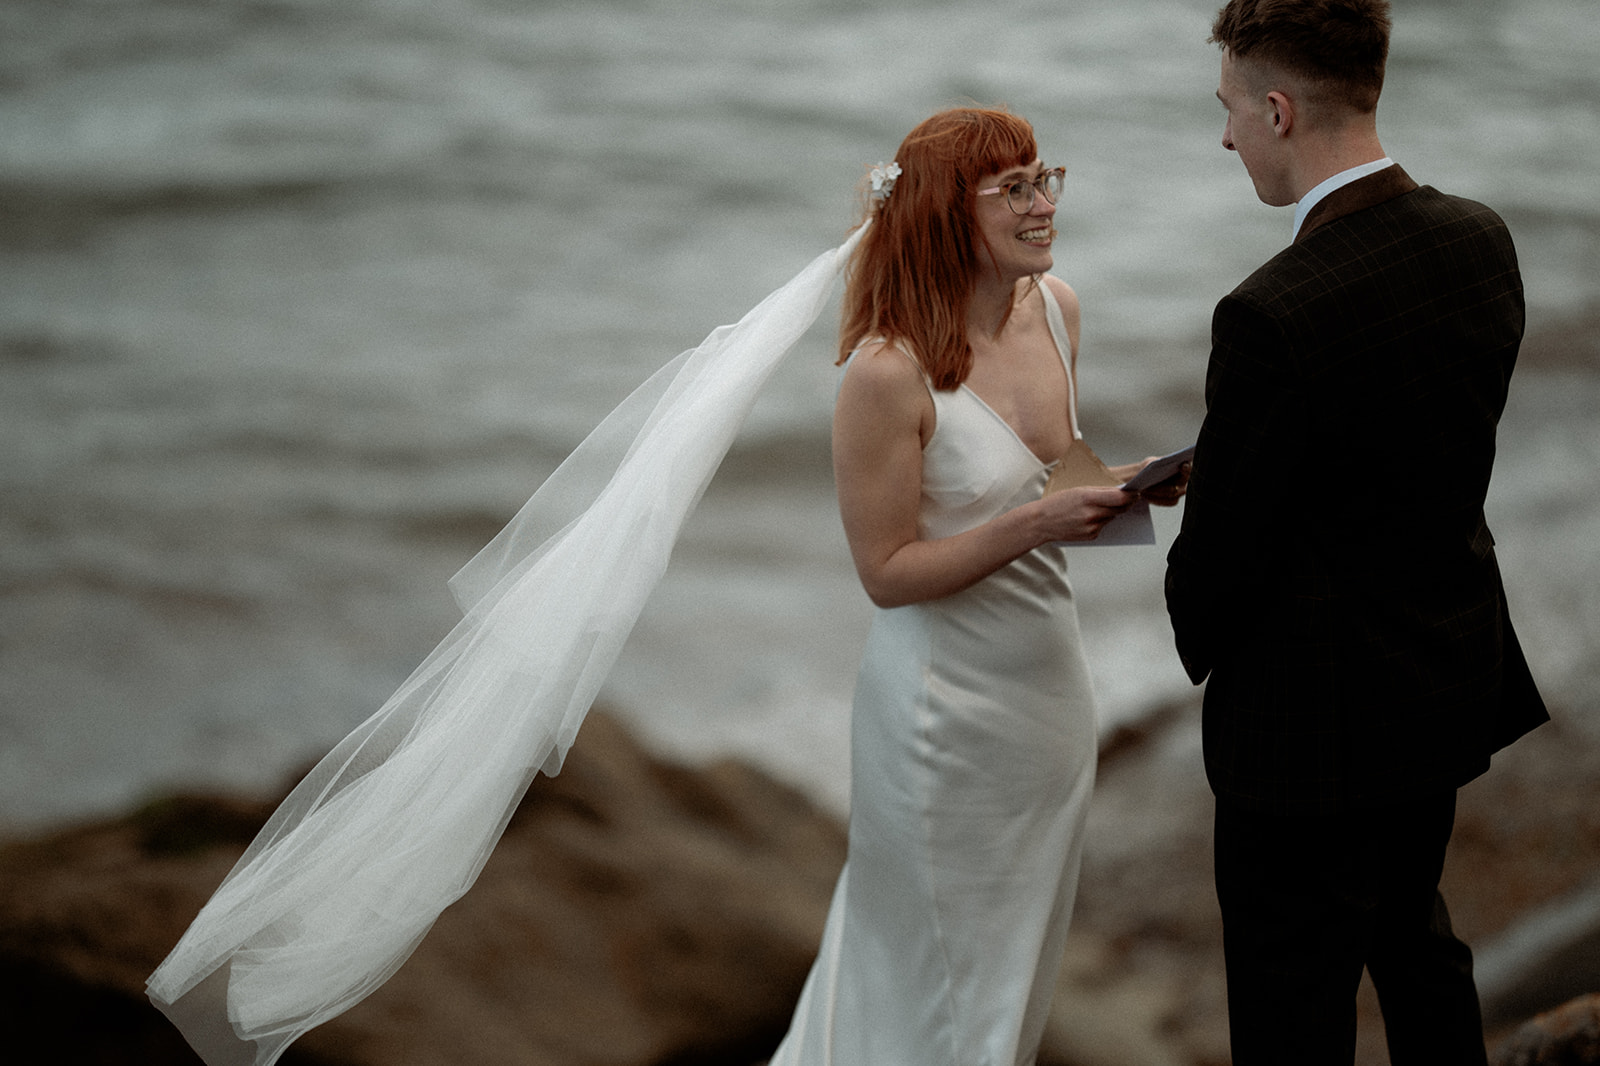 A spring elopement featuring a legal marriage at Penarth Fawr and an exchange of vows along the Llyn Peninsula.